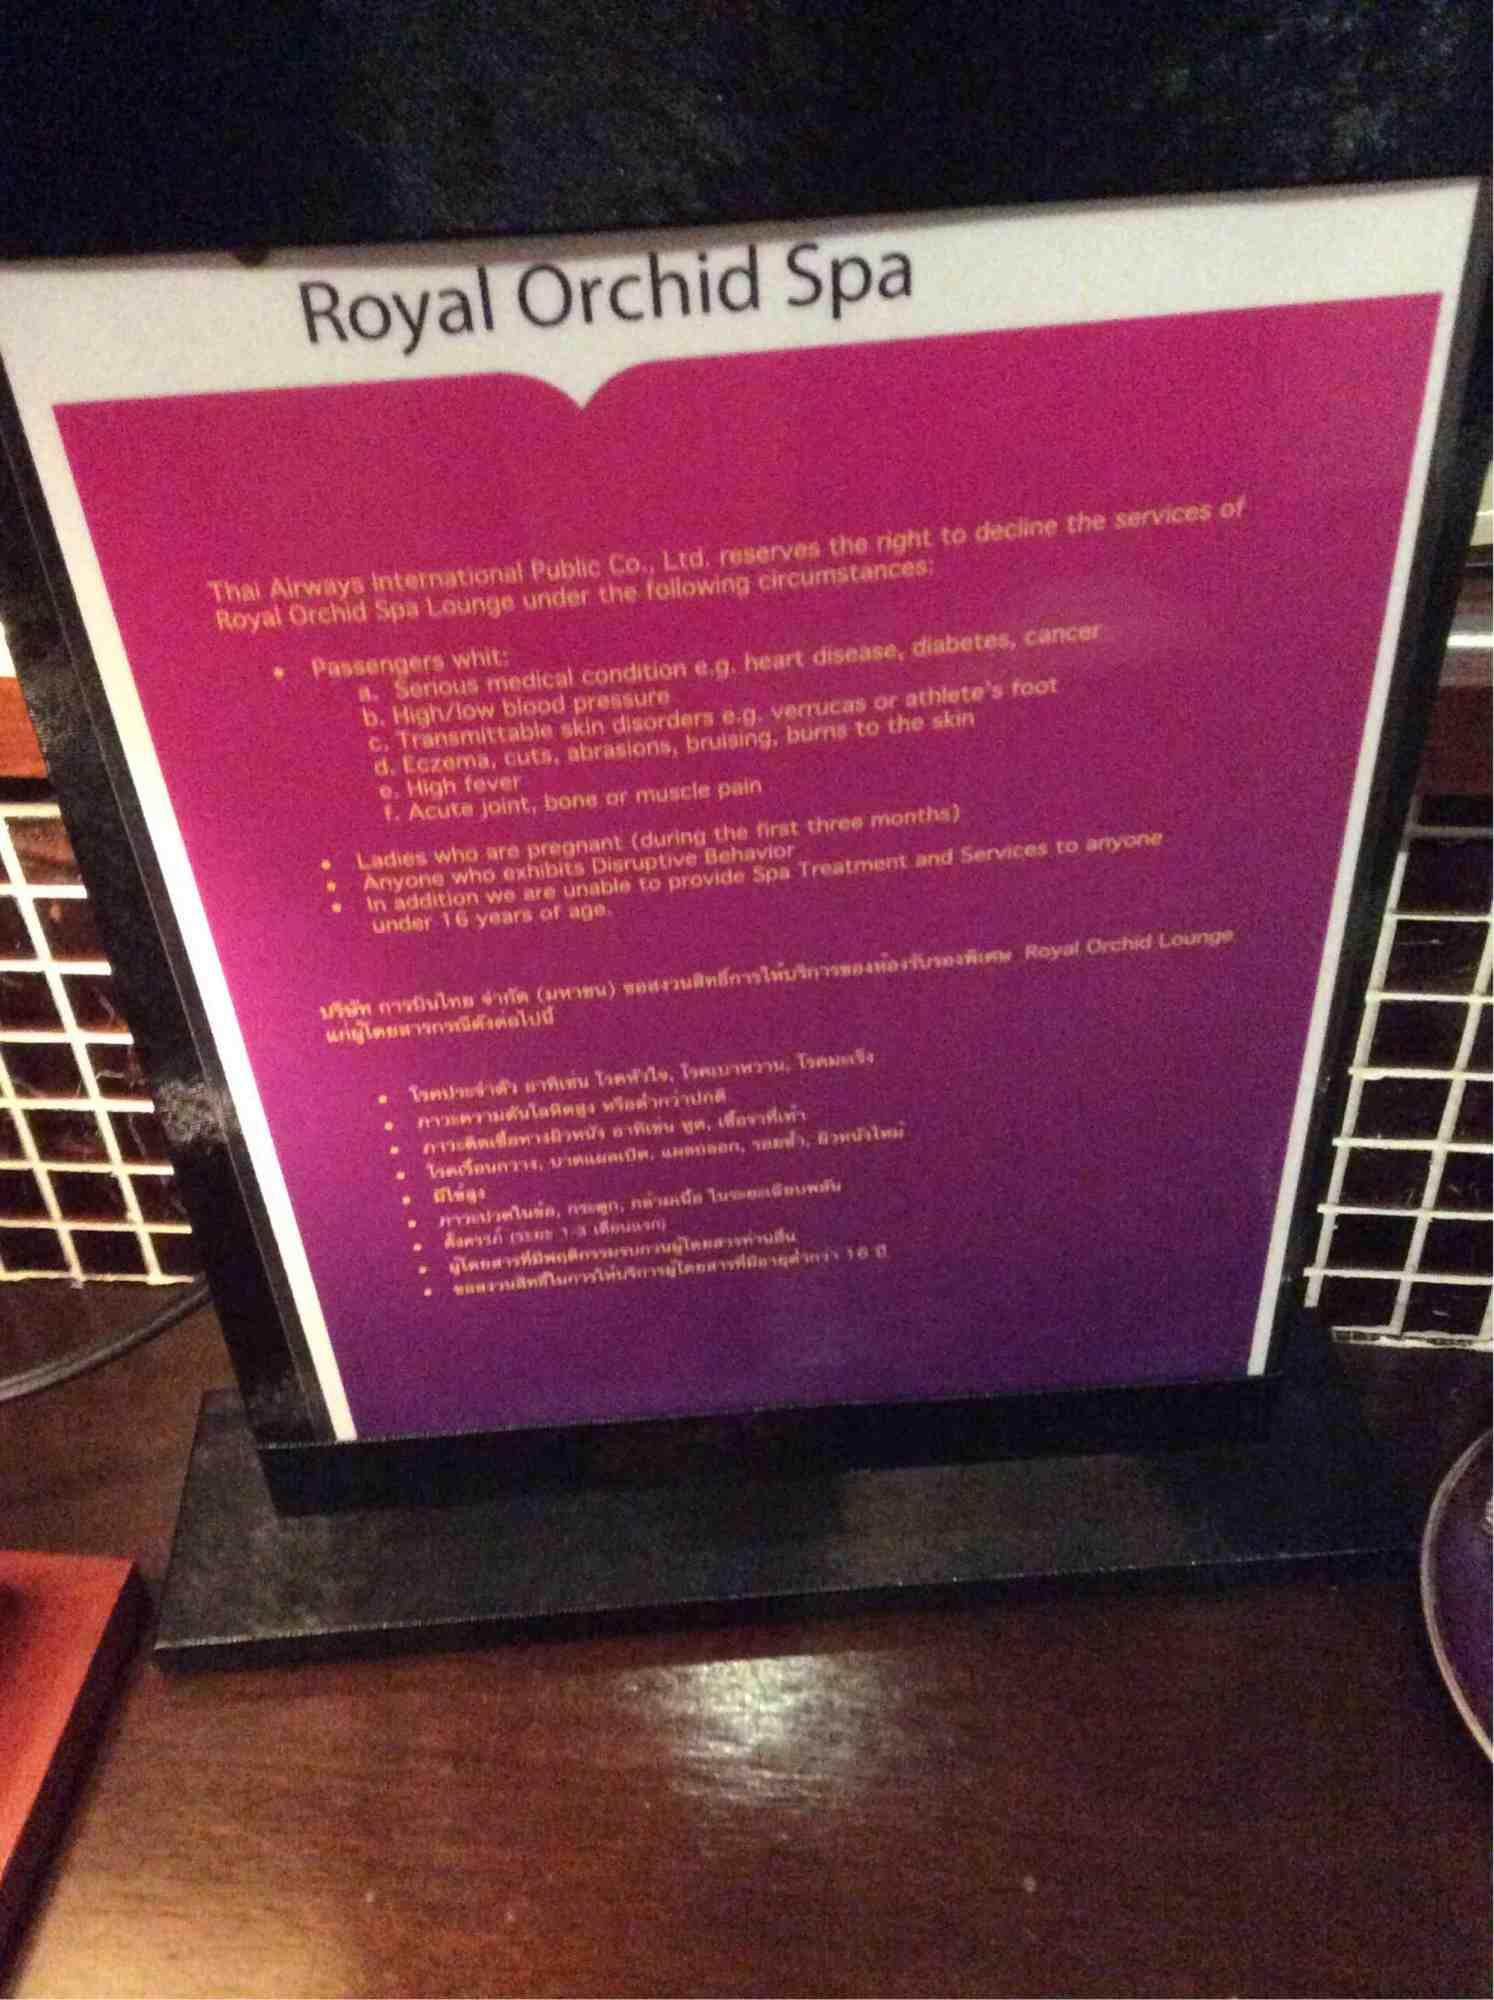 Thai Airways Royal Orchid Spa  image 16 of 25